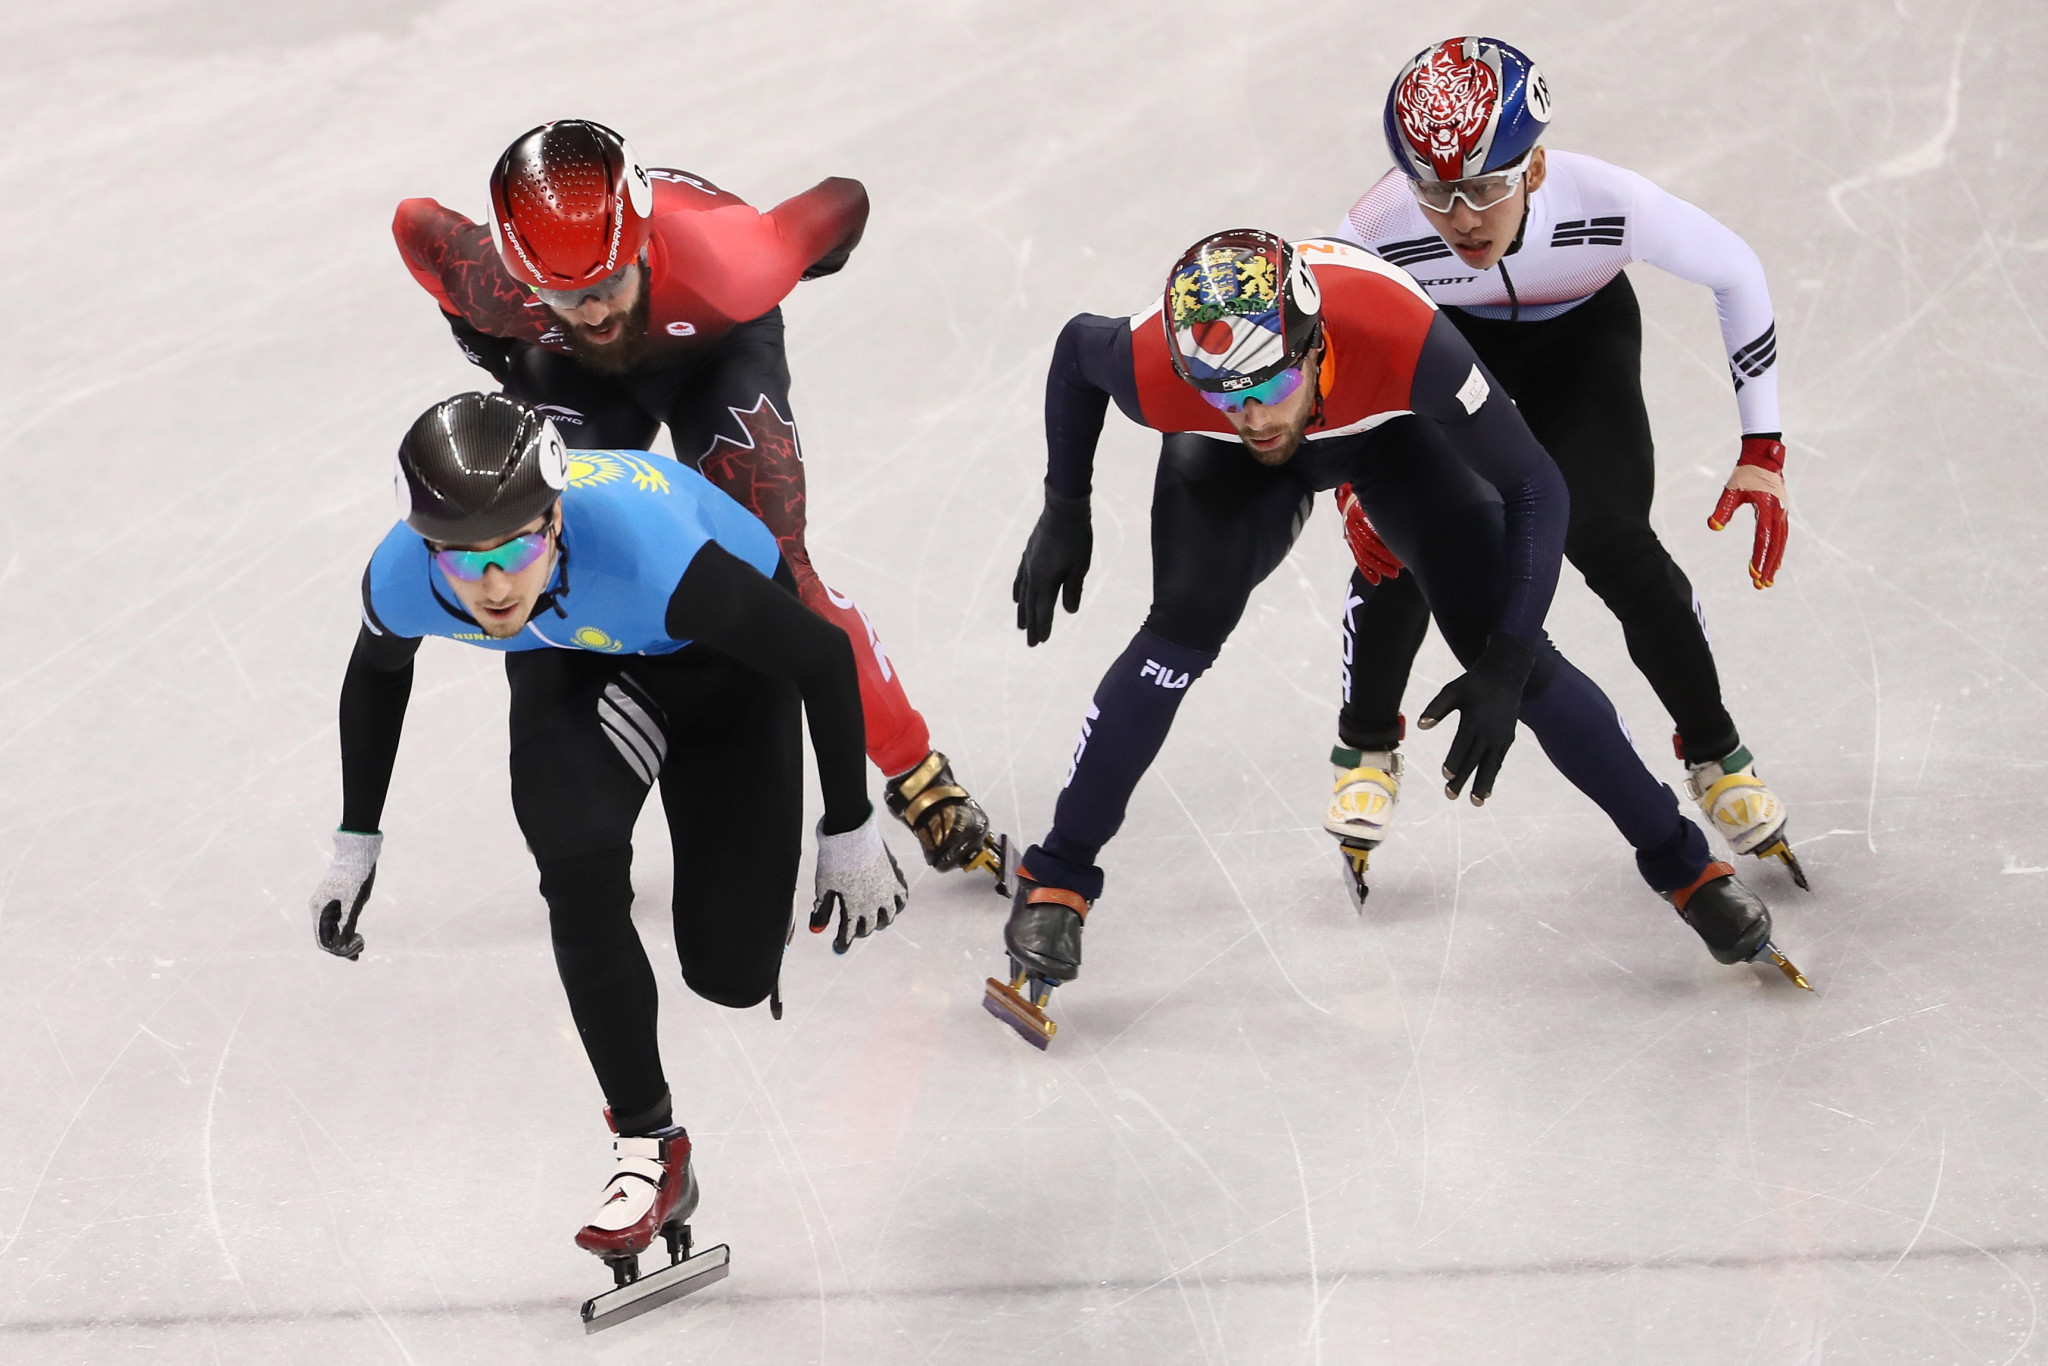 Denis Nikisha, front, leads the pack in the men's 500m overall standings after two third-place finishes ©Getty Images